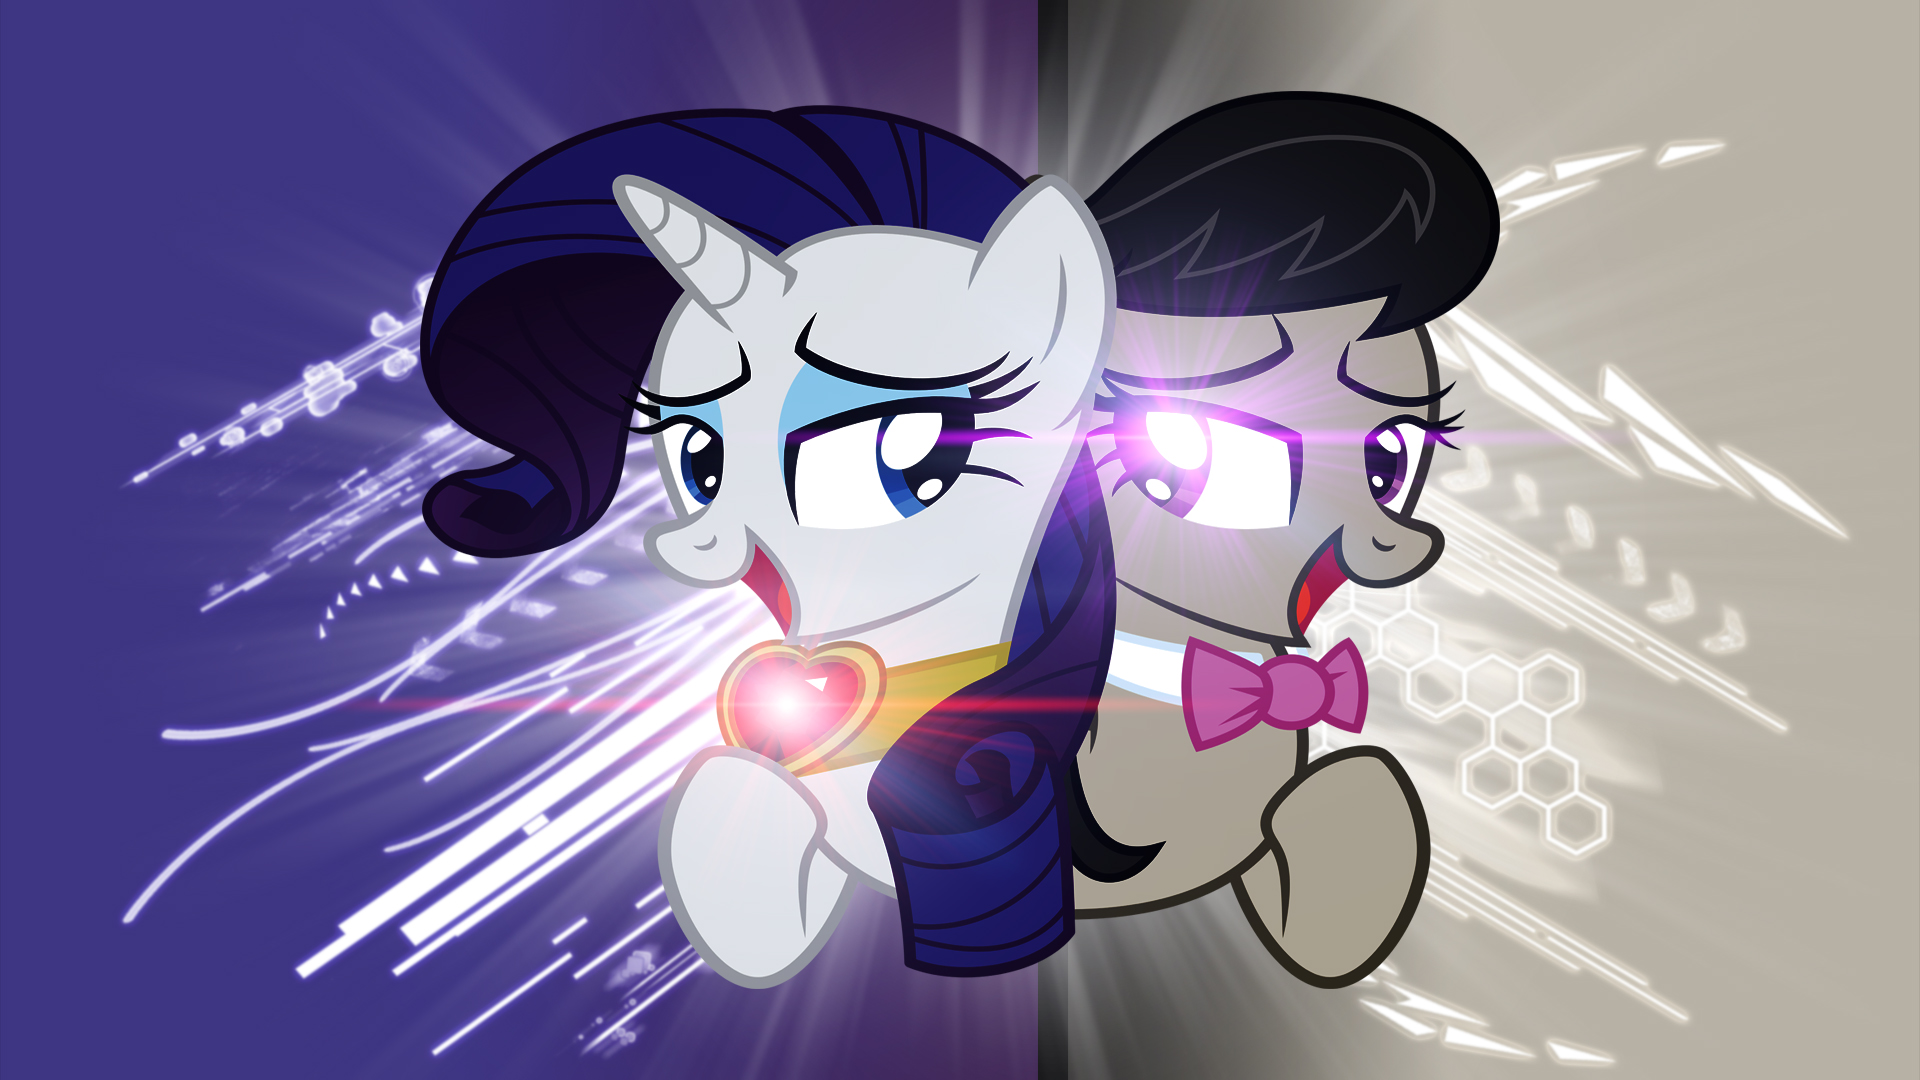 Rarity and Octavia by BronyYAY123, Karl97 and Quanno3